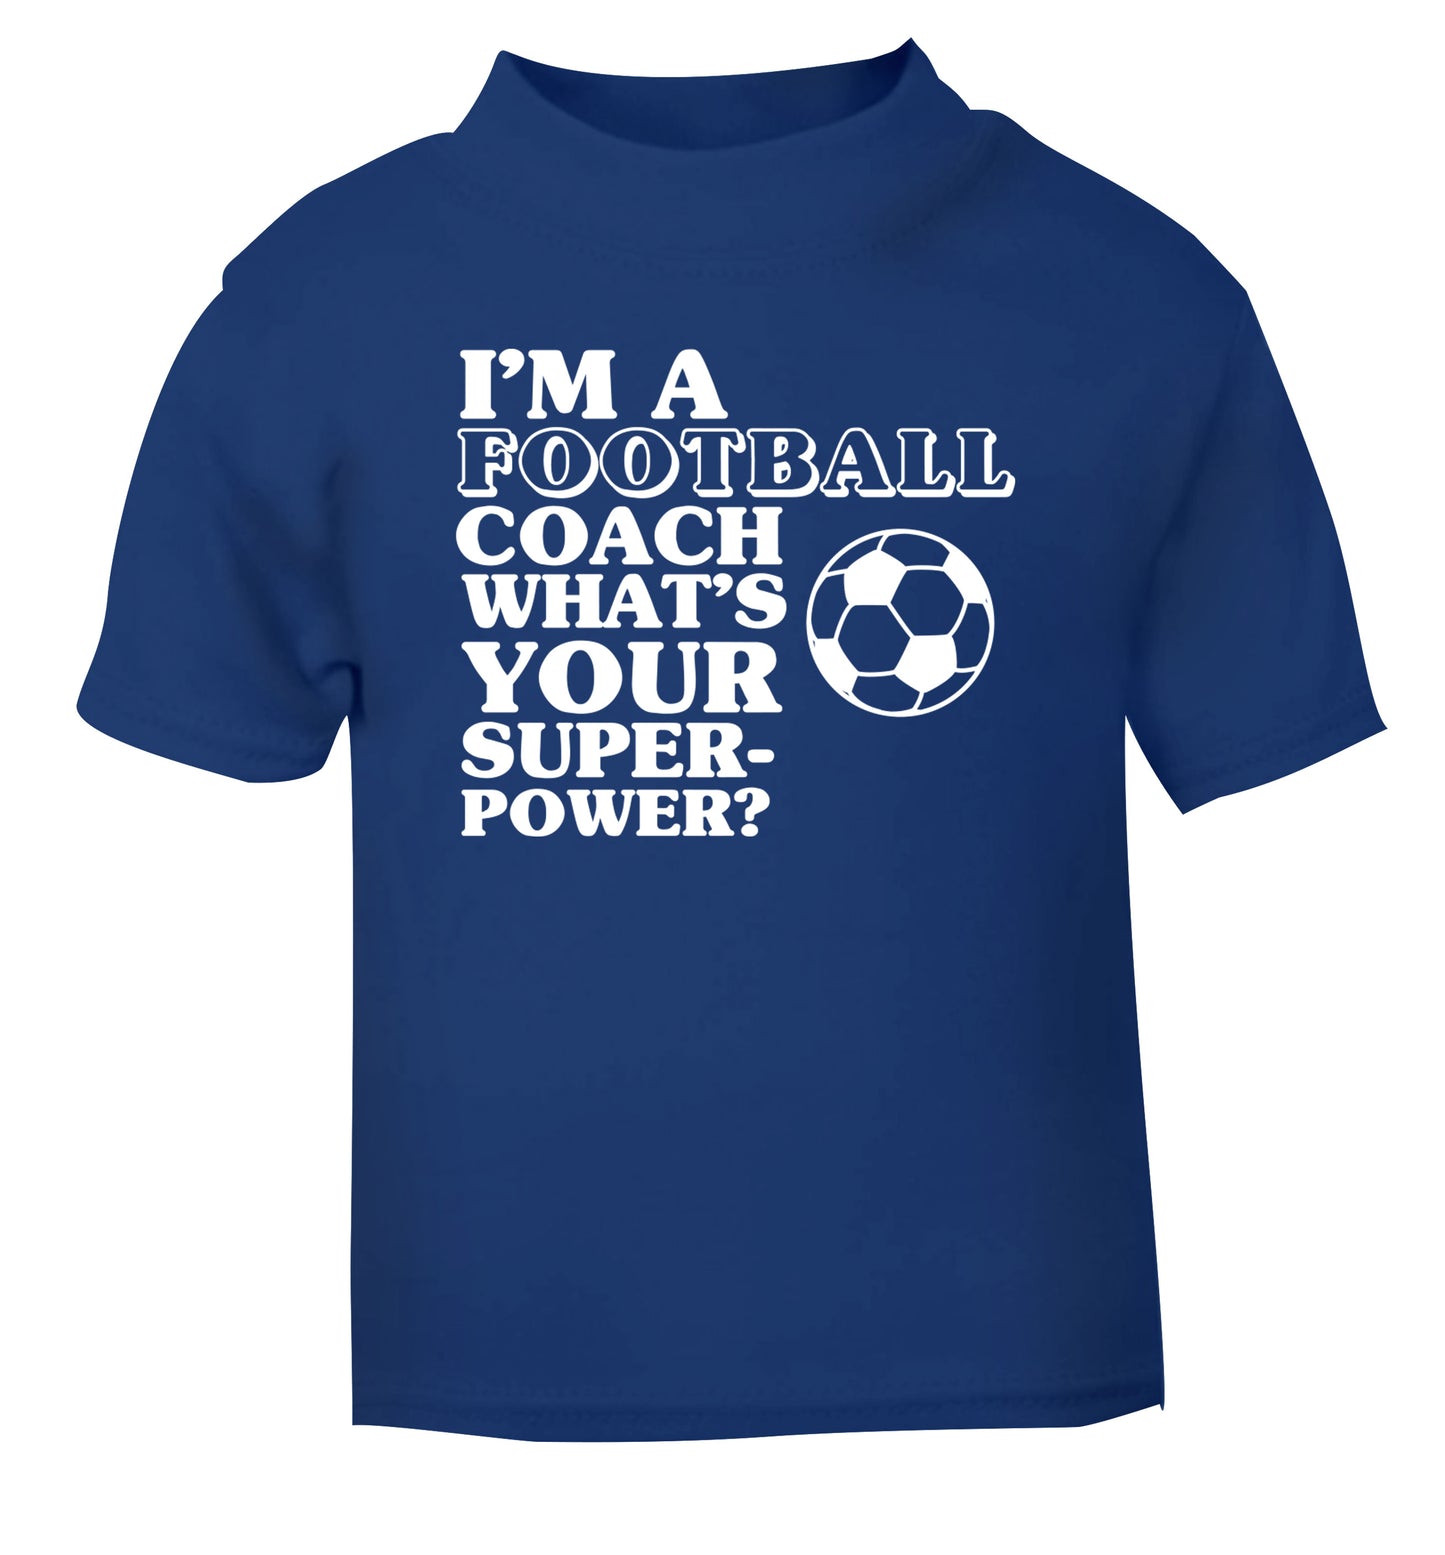 I'm a football coach what's your superpower? blue Baby Toddler Tshirt 2 Years